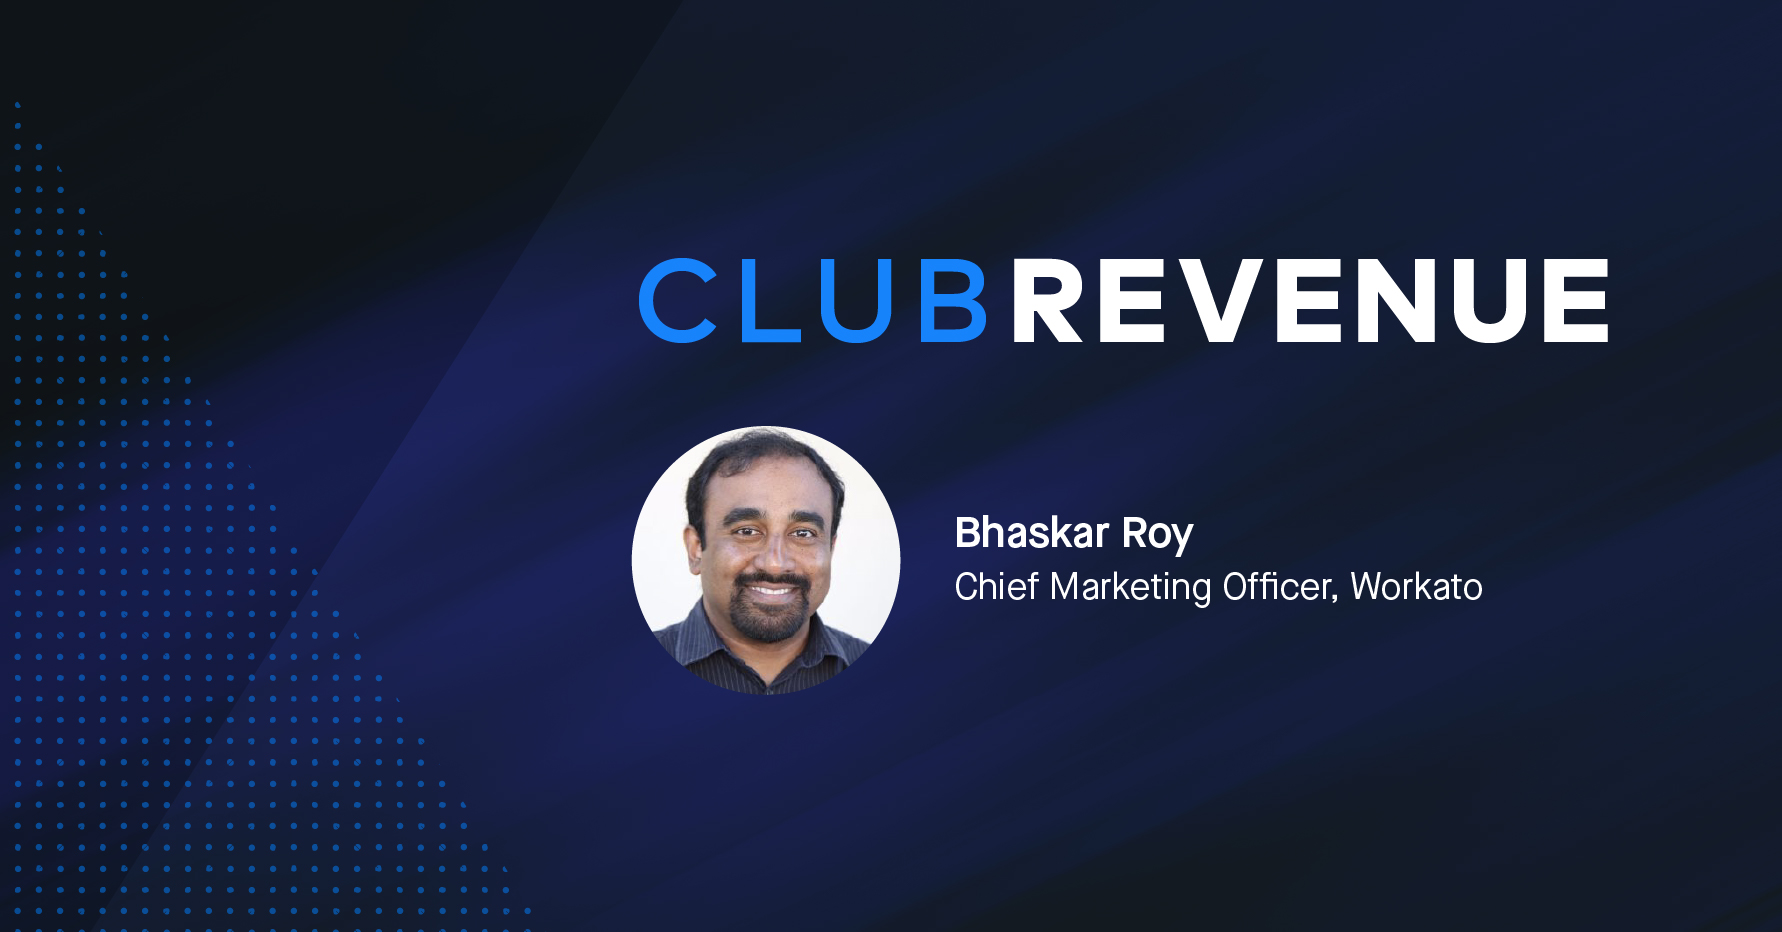 Banner image that says Club Revenue with a headshot photograph of Bhaskar Roy, Chief Marketing Officer at Workato